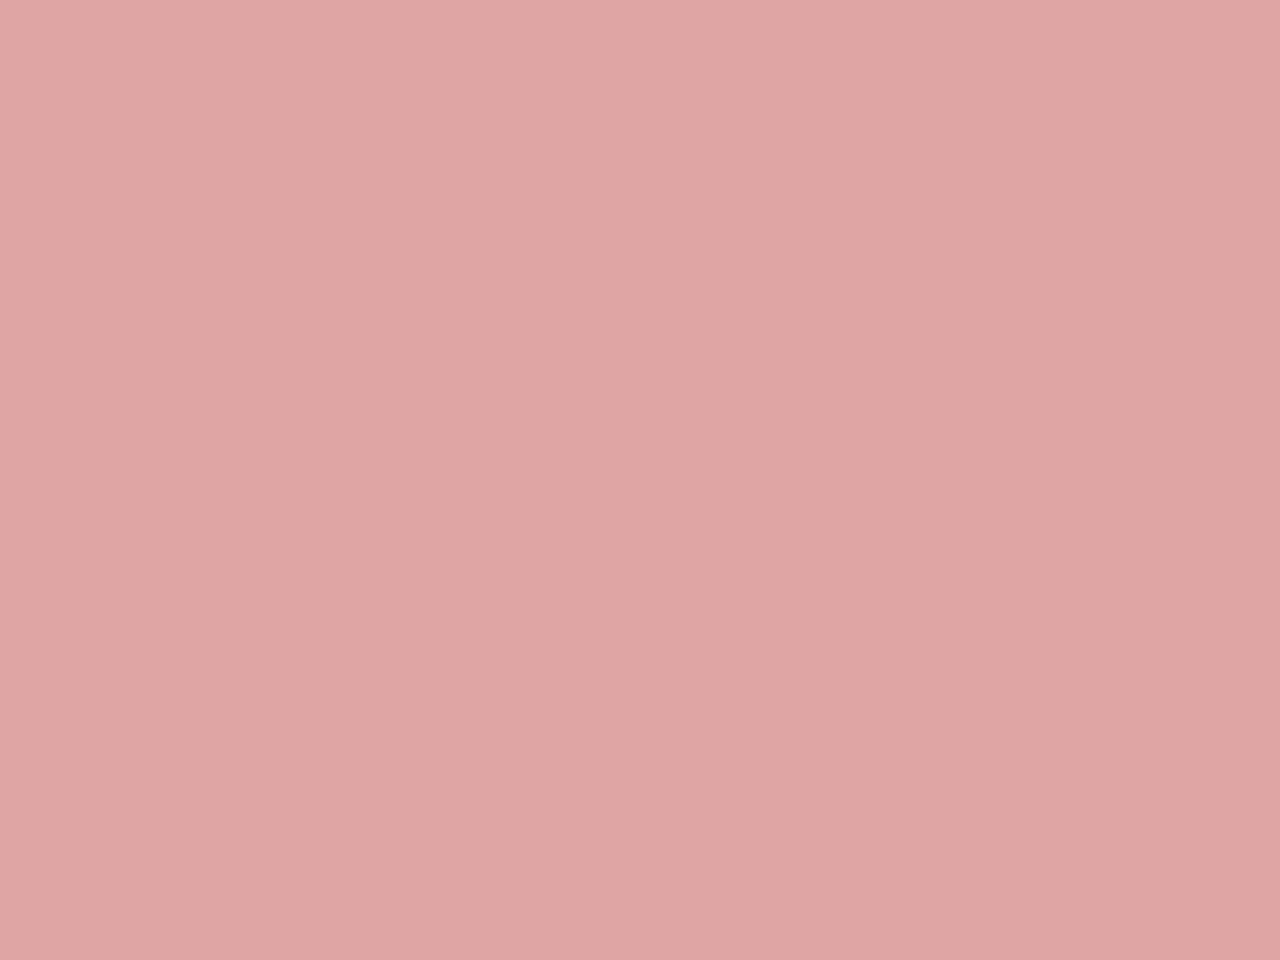 Free 1280x960 resolution Pastel Pink solid color background view and